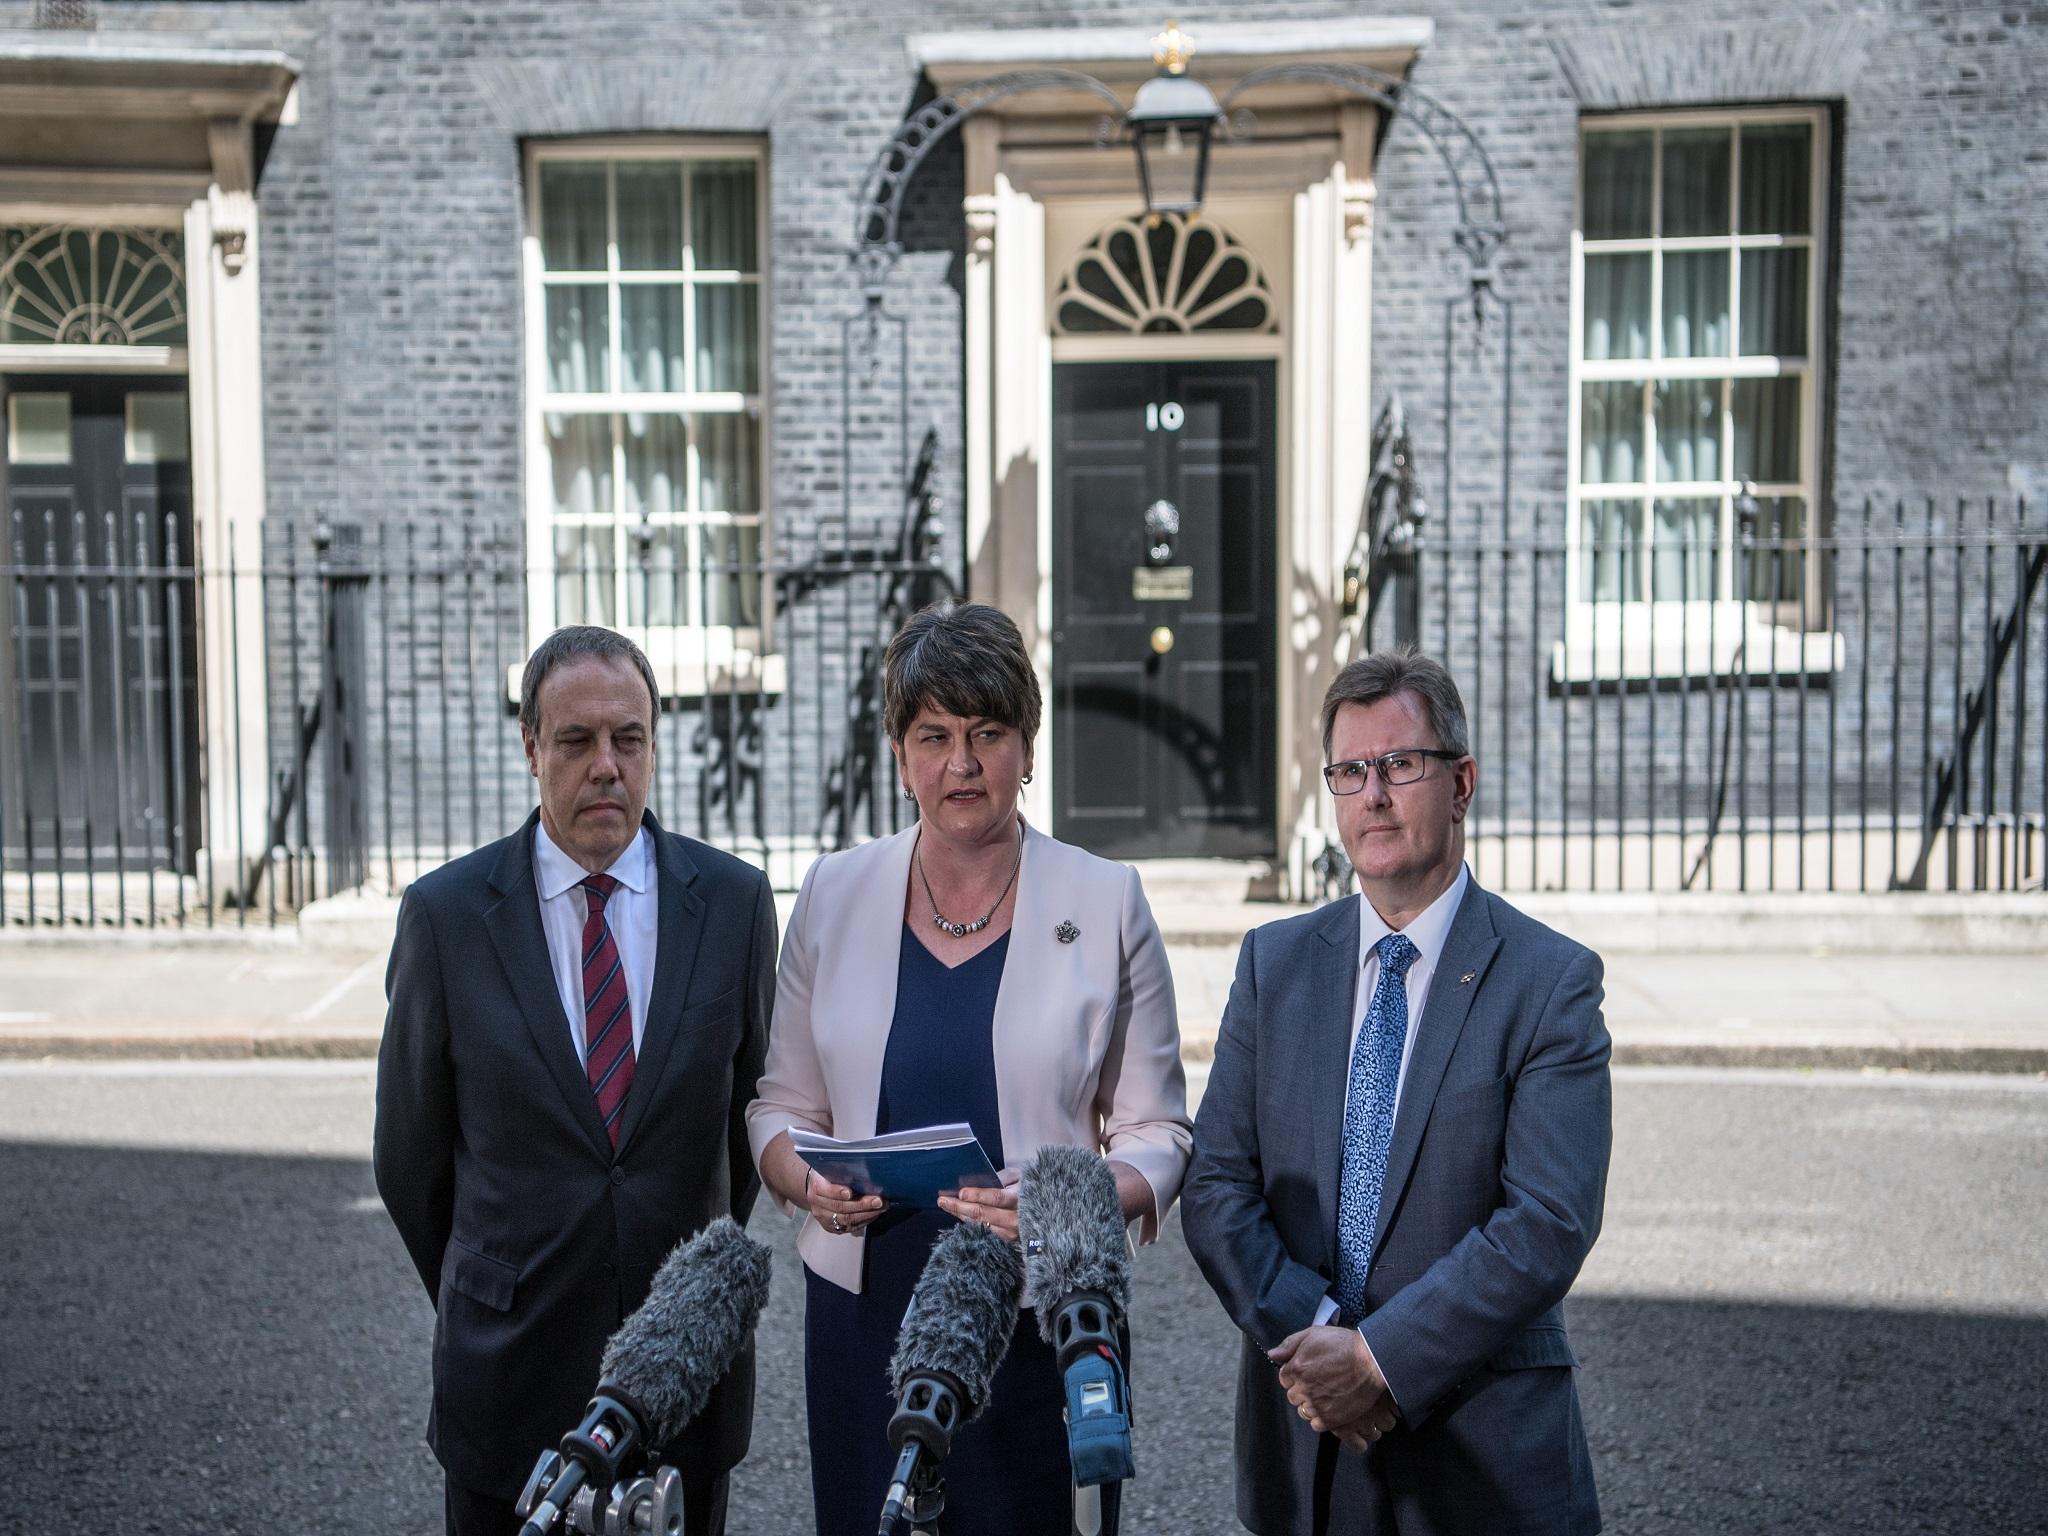 After much haggling with the Conservatives, the DUP finally agreed a deal to prop up the minority Government